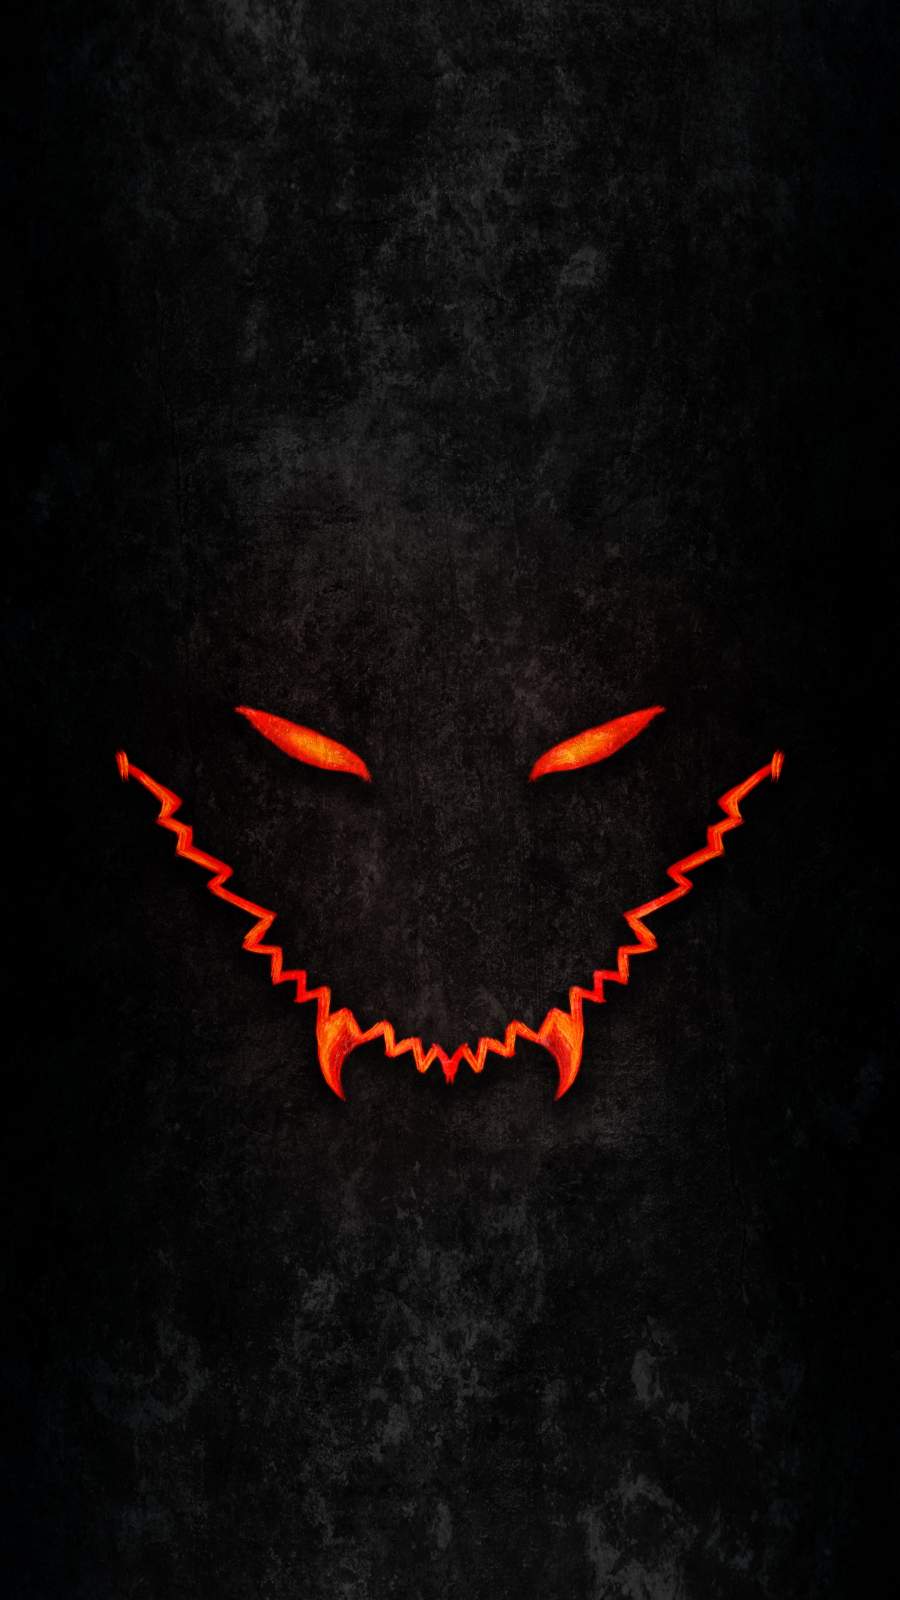 Scary Monster - Undead Demons Wallpaper Download | MobCup-mncb.edu.vn